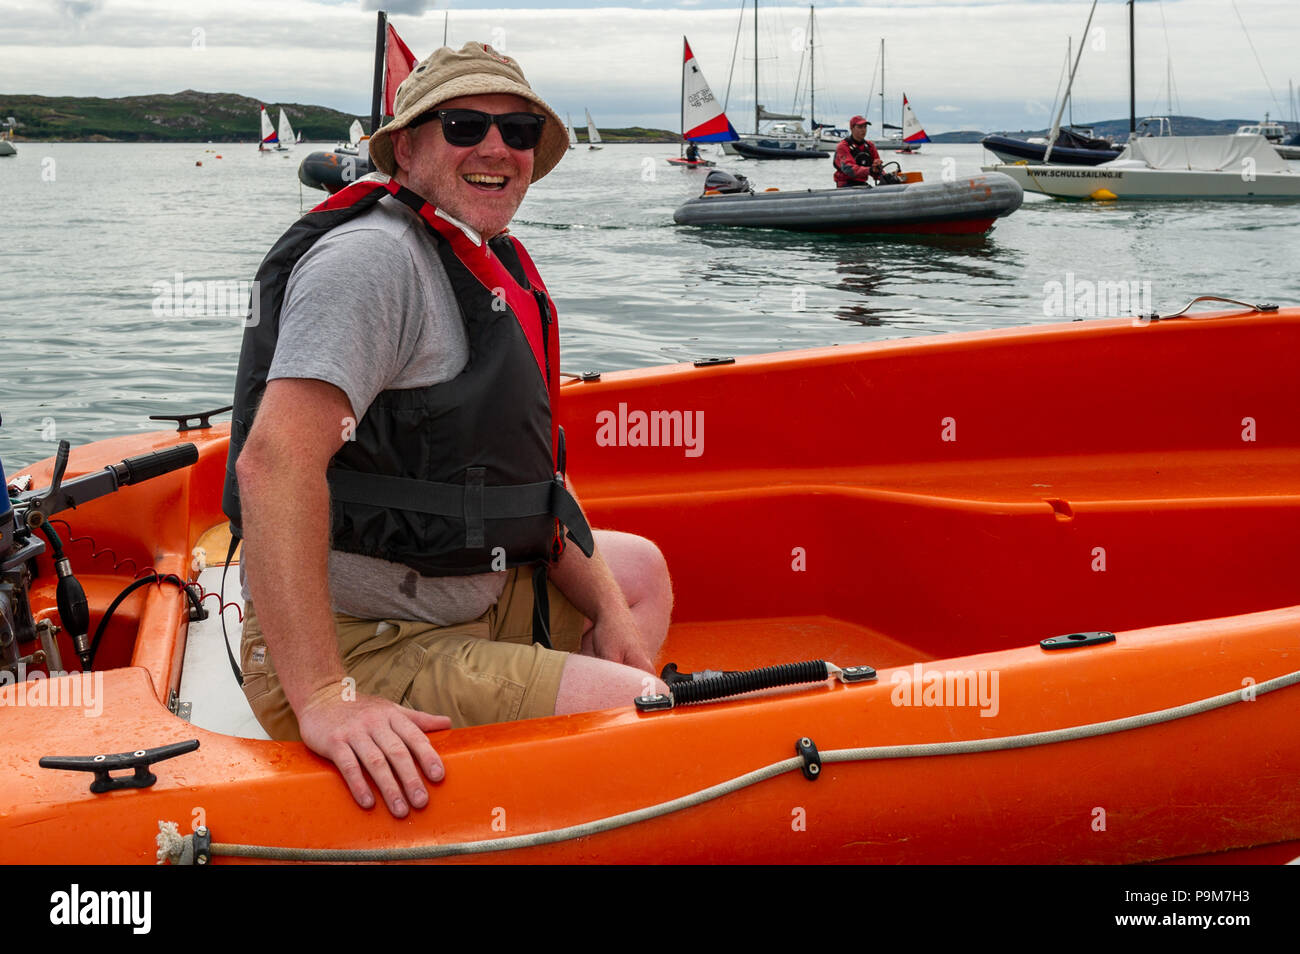 Schull, West Cork, Ireland. 19th July, 2018. Young people come from all over the island of Ireland, including the North, to take part in the schools regatta which is aimed at novice racing sailors. Ken Philpott from Northern Ireland manned a safety boat. Credit: Andy Gibson/Alamy Live News. Stock Photo